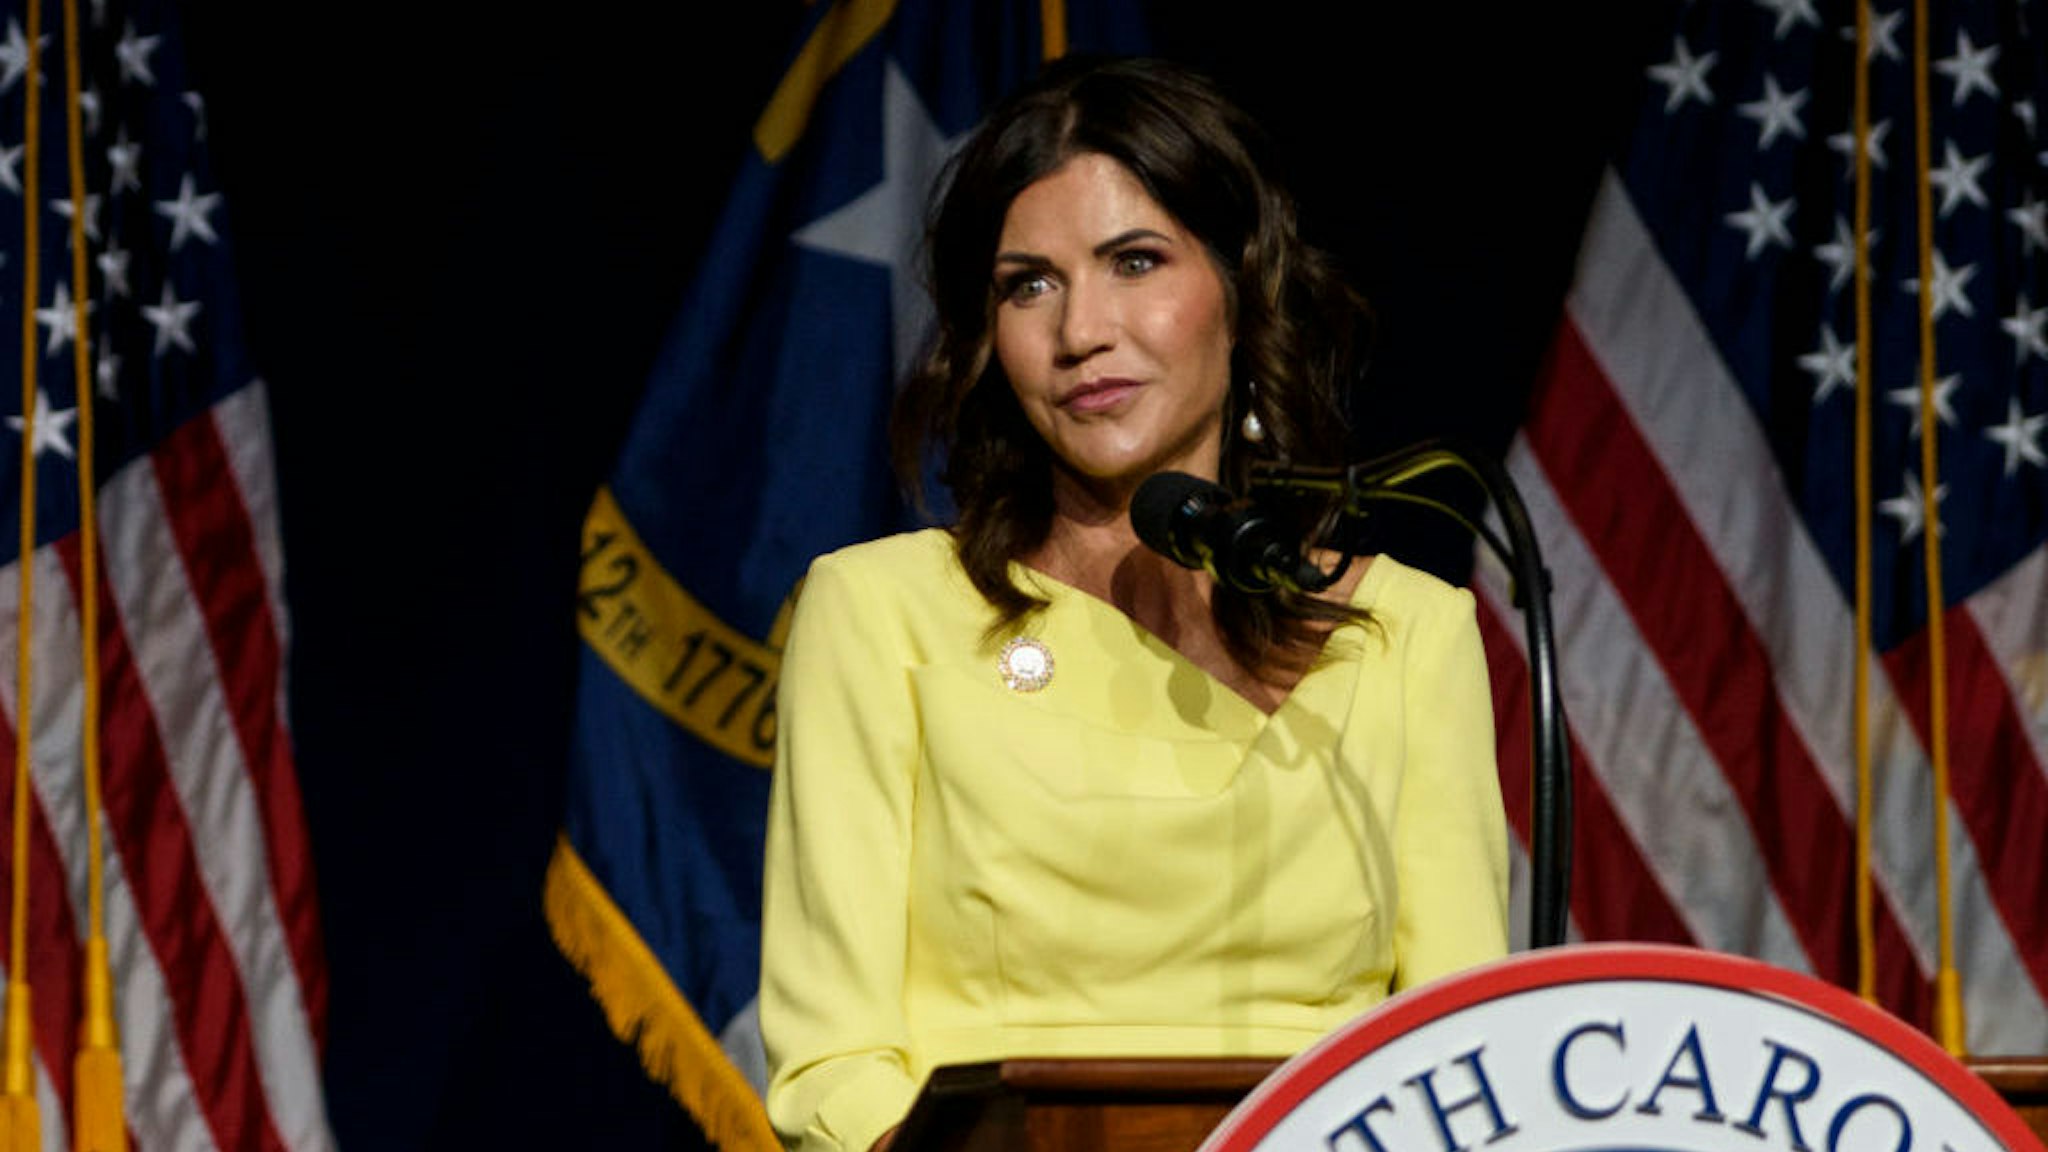 GREENVILLE, NC - JUNE 05: South Dakota Gov. Kristi Noem speaks to attendees at the NCGOP convention on June 5, 2021 in Greenville, North Carolina. (Photo by Melissa Sue Gerrits/Getty Images)